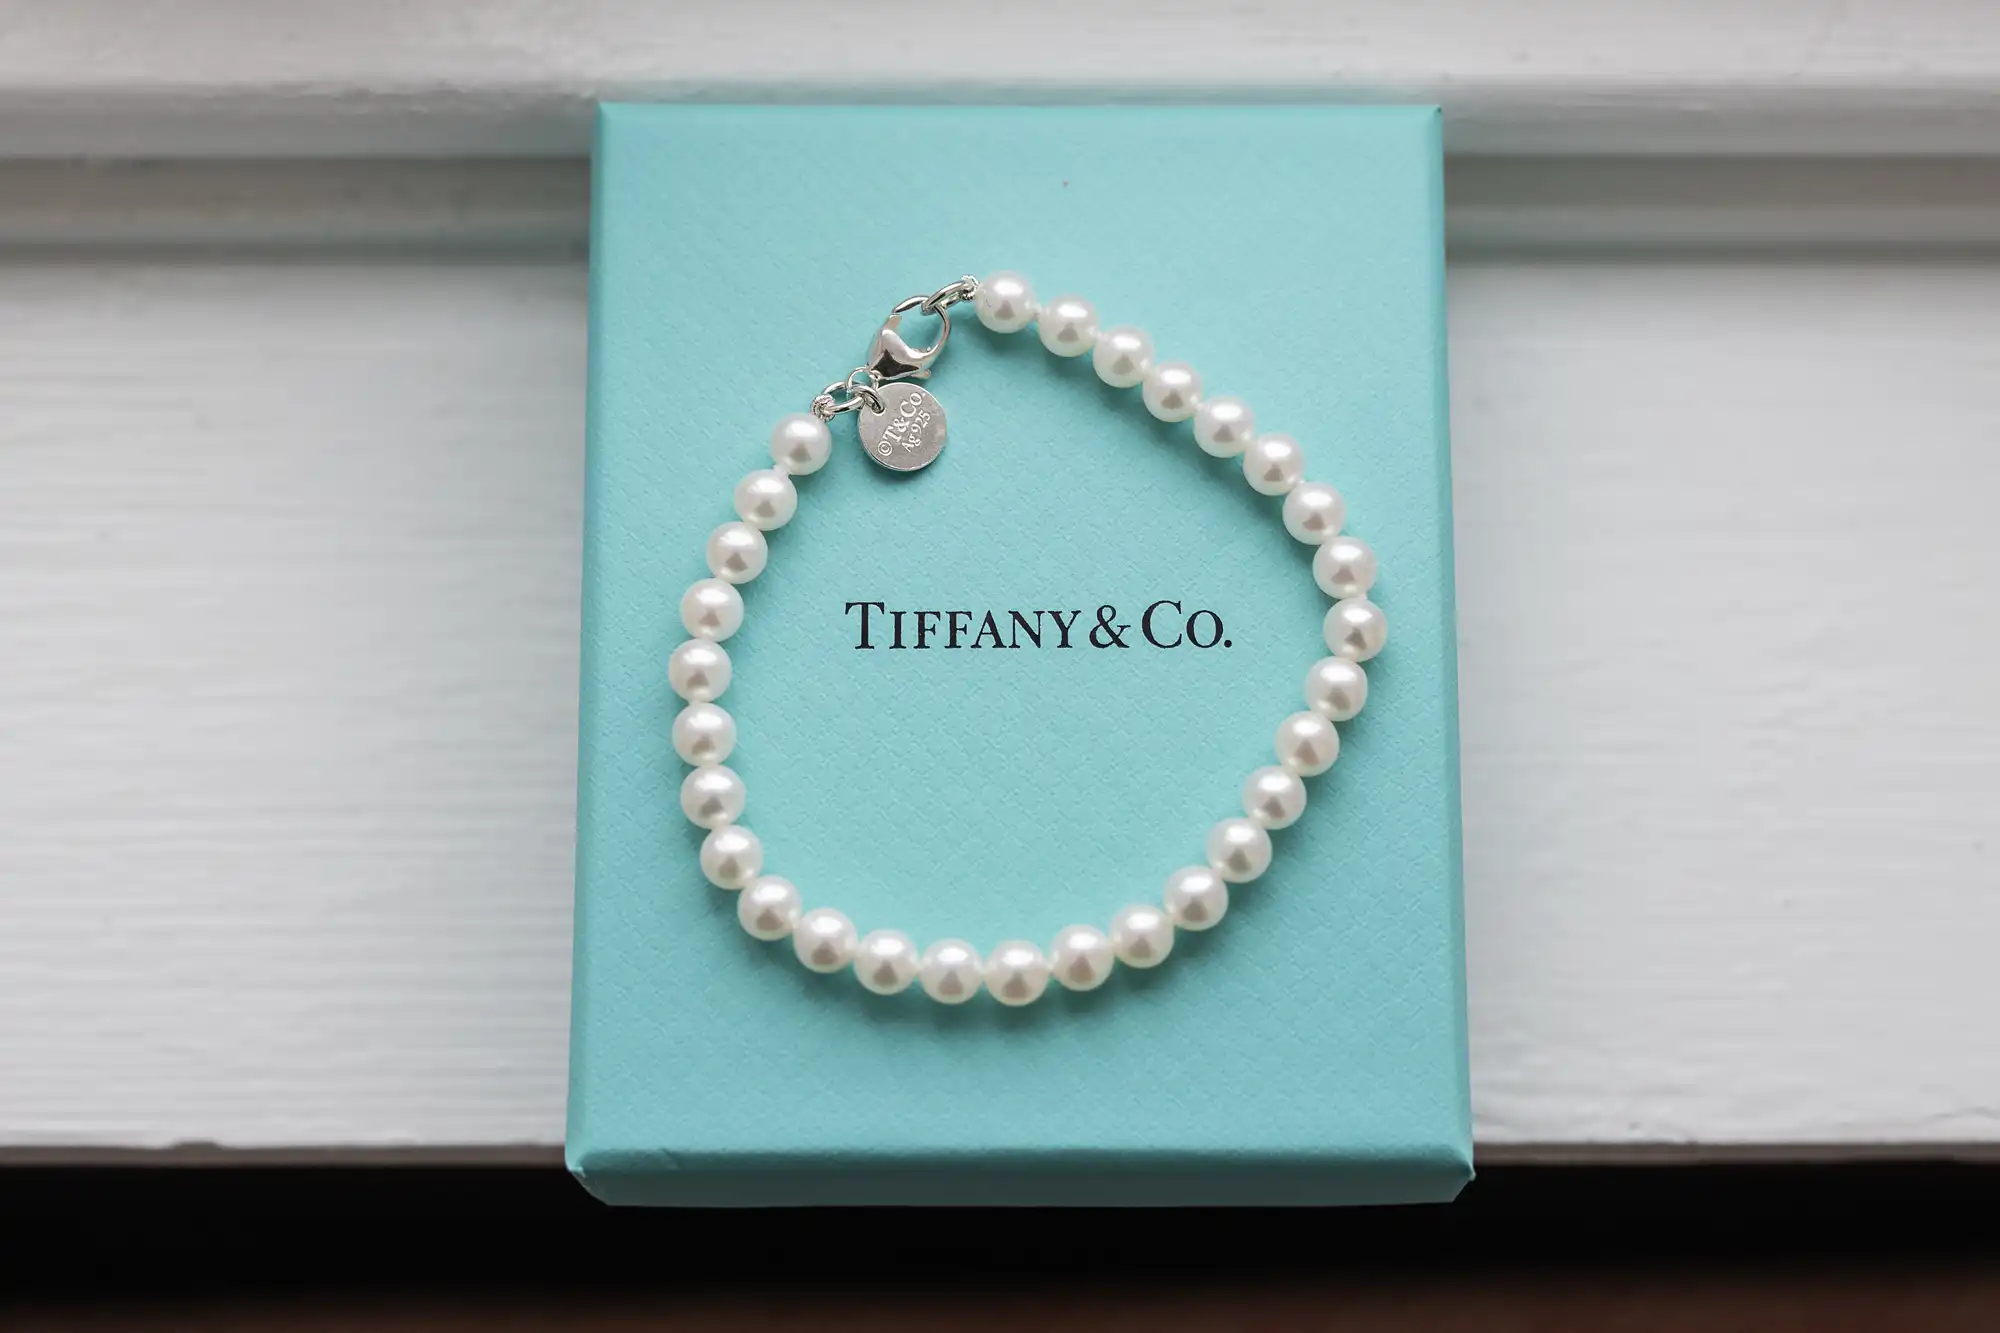 A pearl bracelet with a silver charm rests on a Tiffany & Co. box placed on a white windowsill.